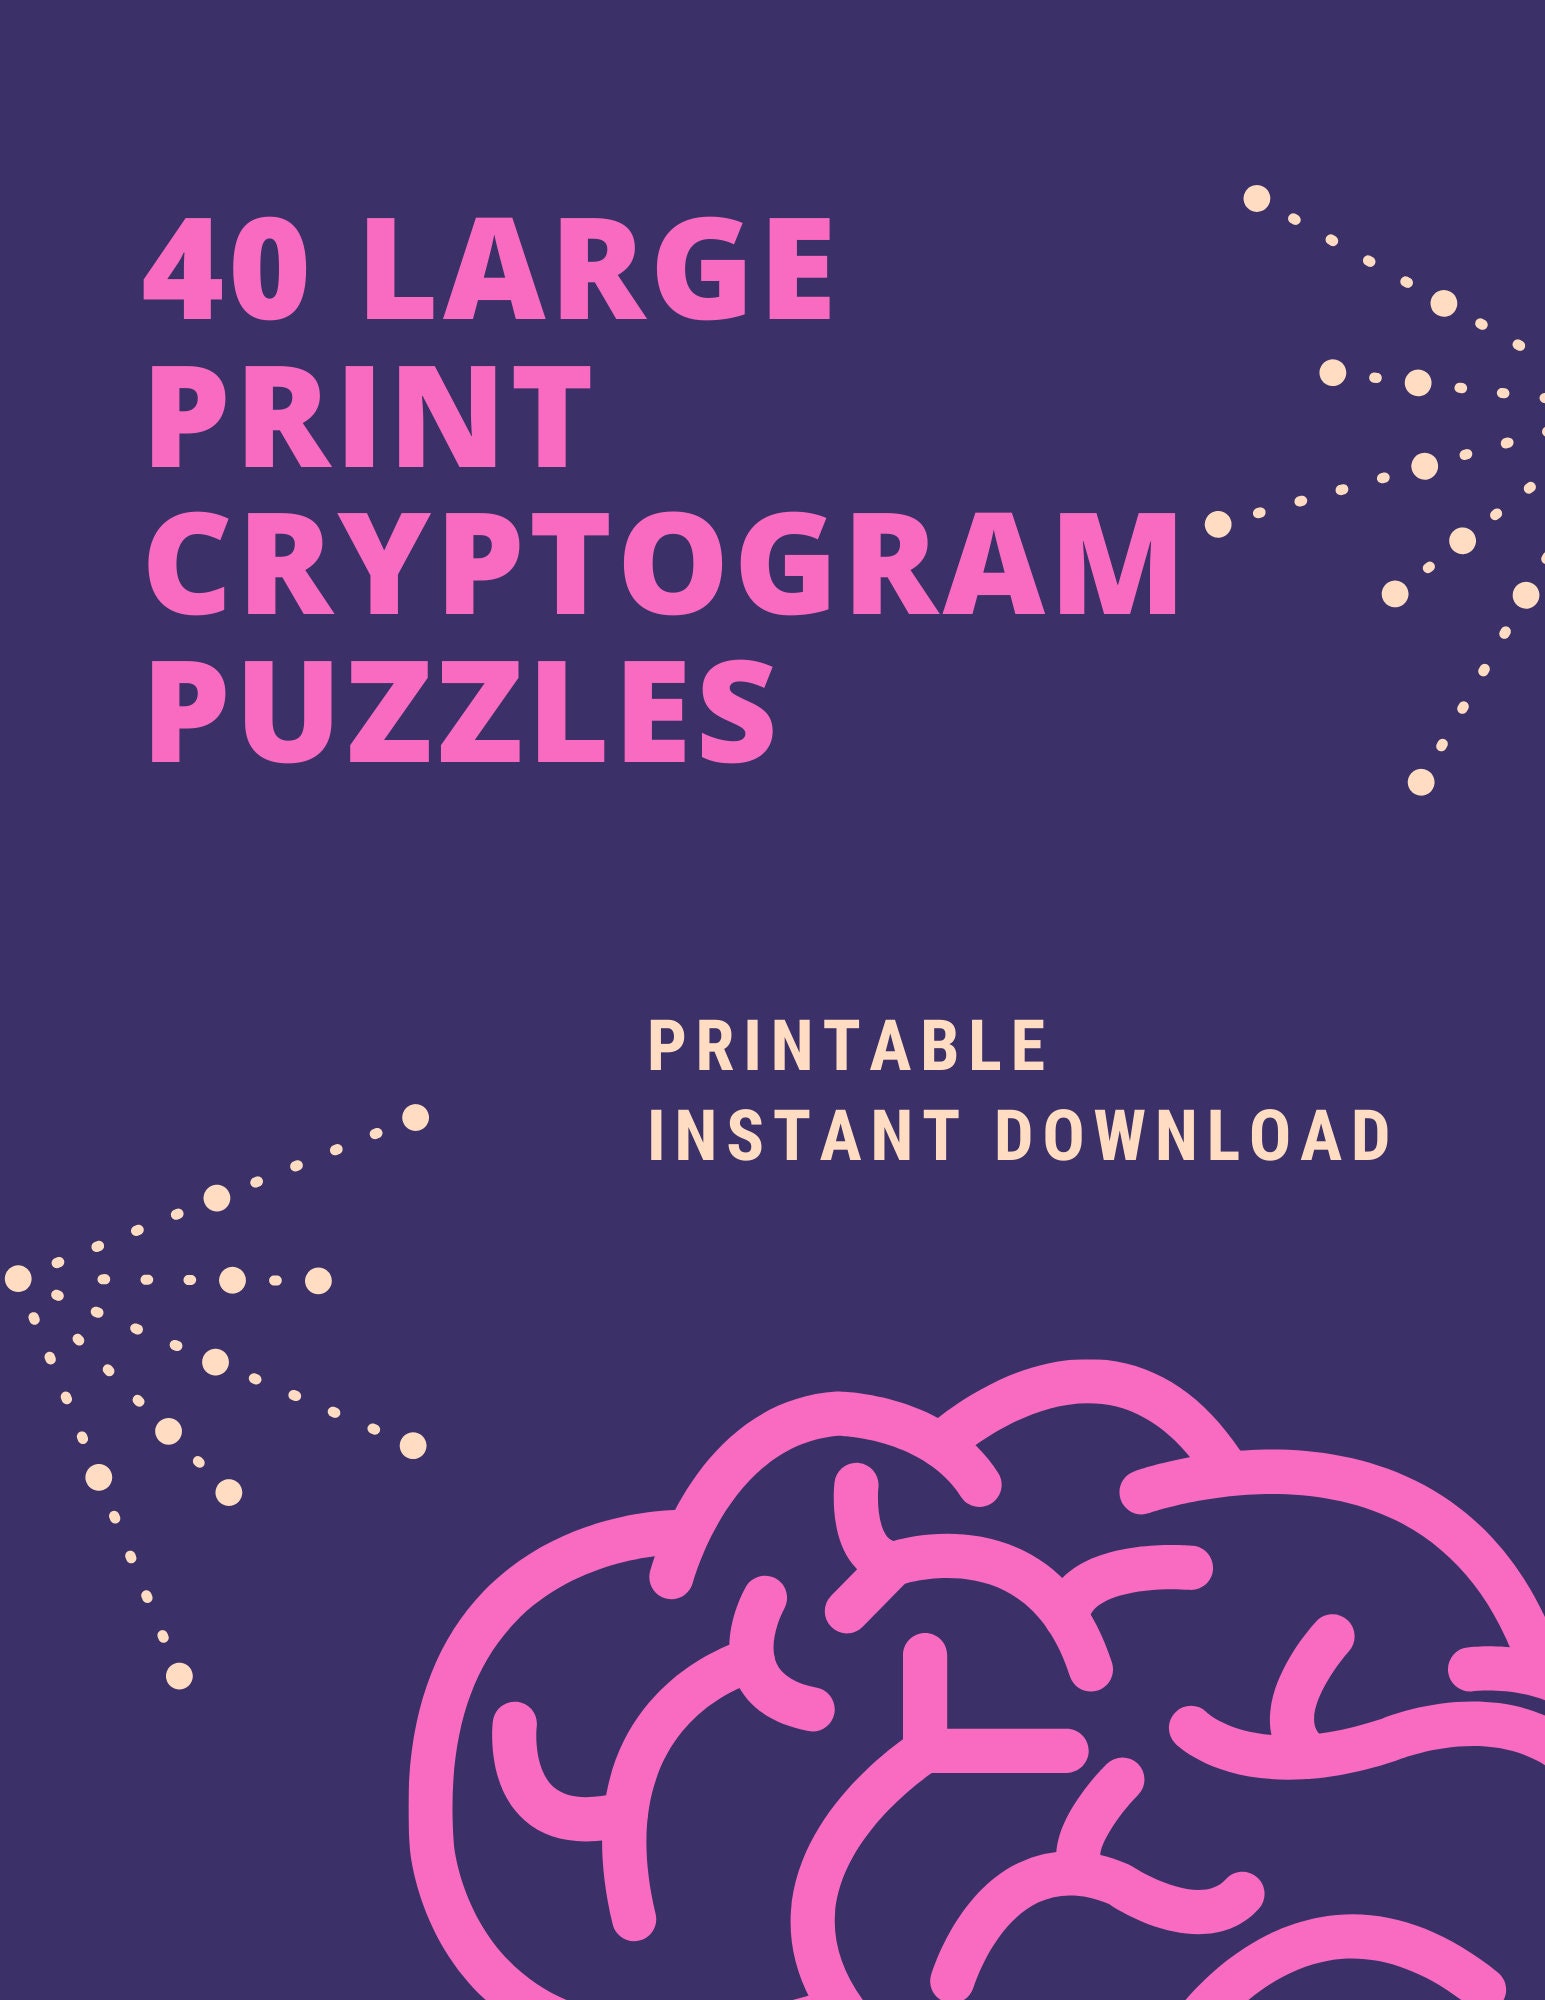 40-large-print-cryptogram-puzzles-printable-instant-etsy